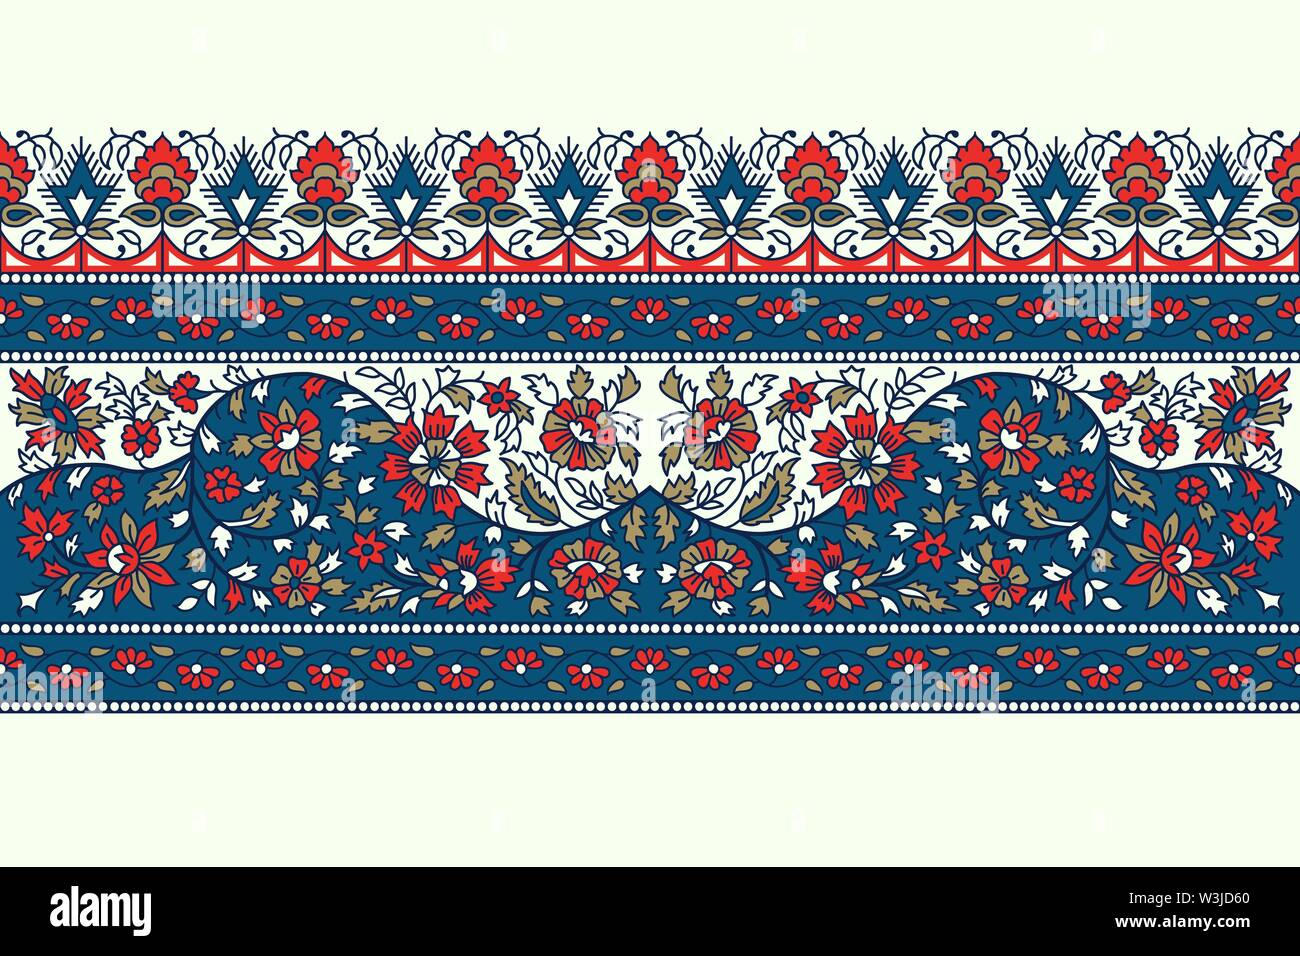 Woodblock printed indigo dye seamless floral ethnic border. Traditional oriental ornament of India, flower garland motif, blue, red and gold tones Stock Vector